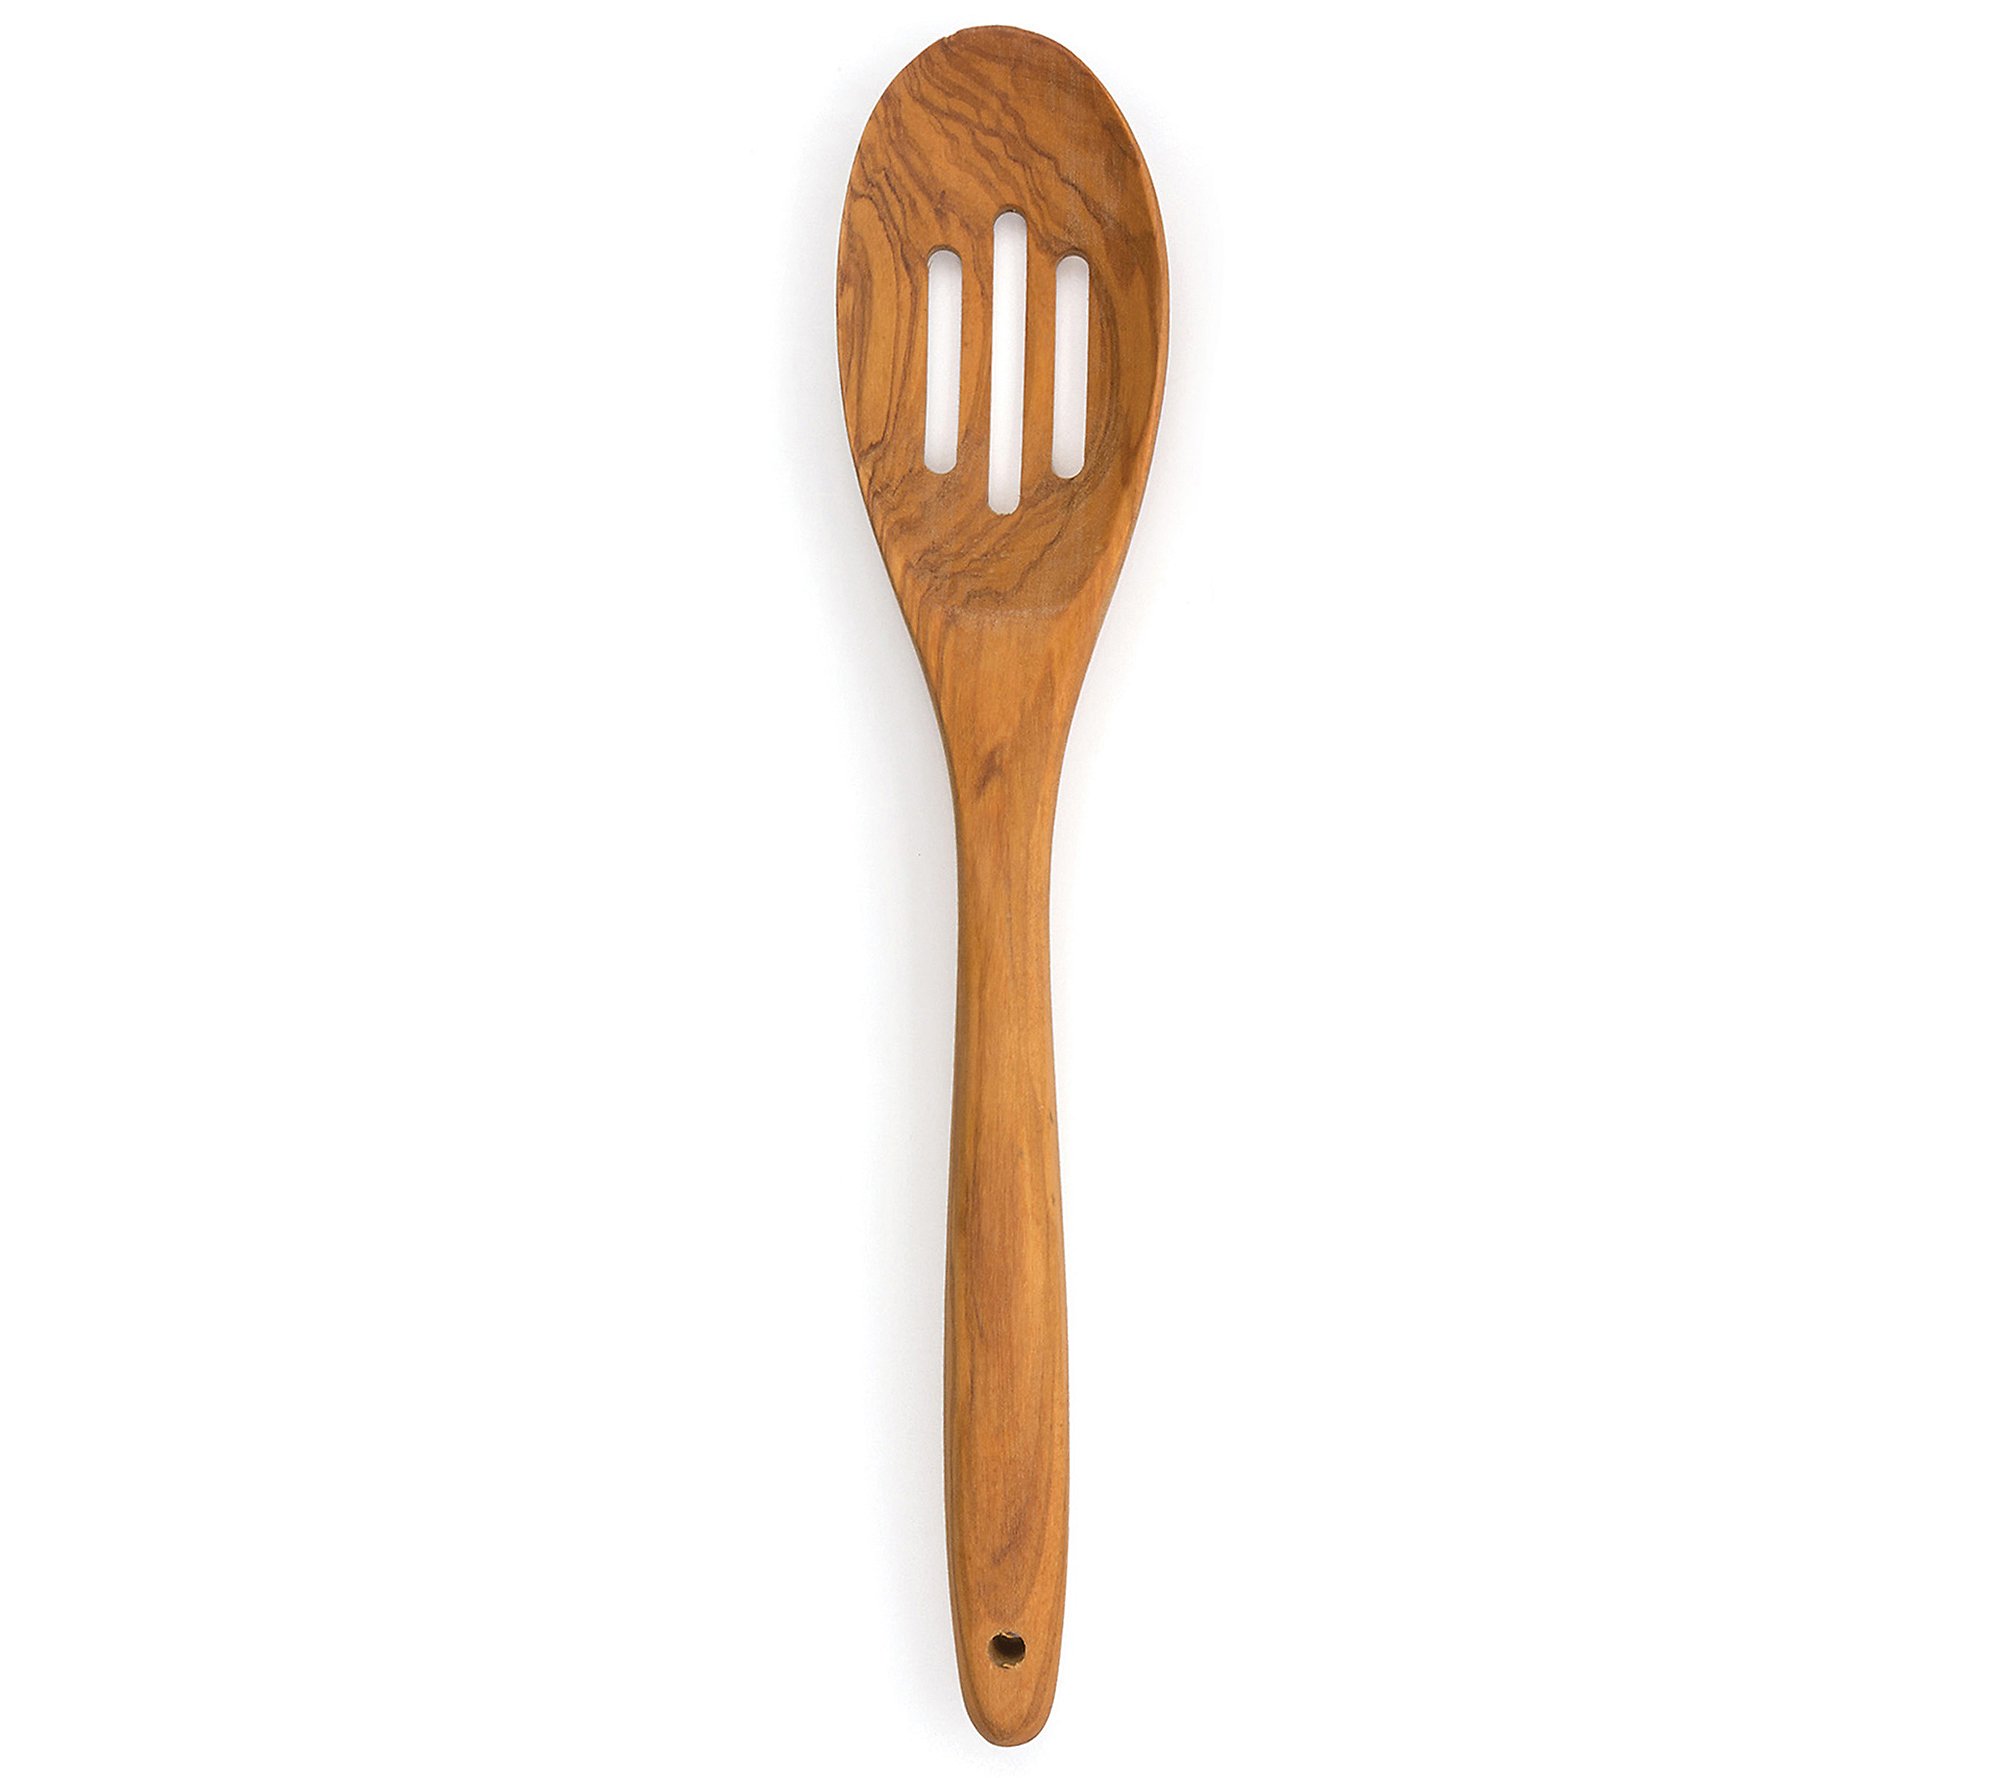 RSVP Olive Wood Slotted Spoon